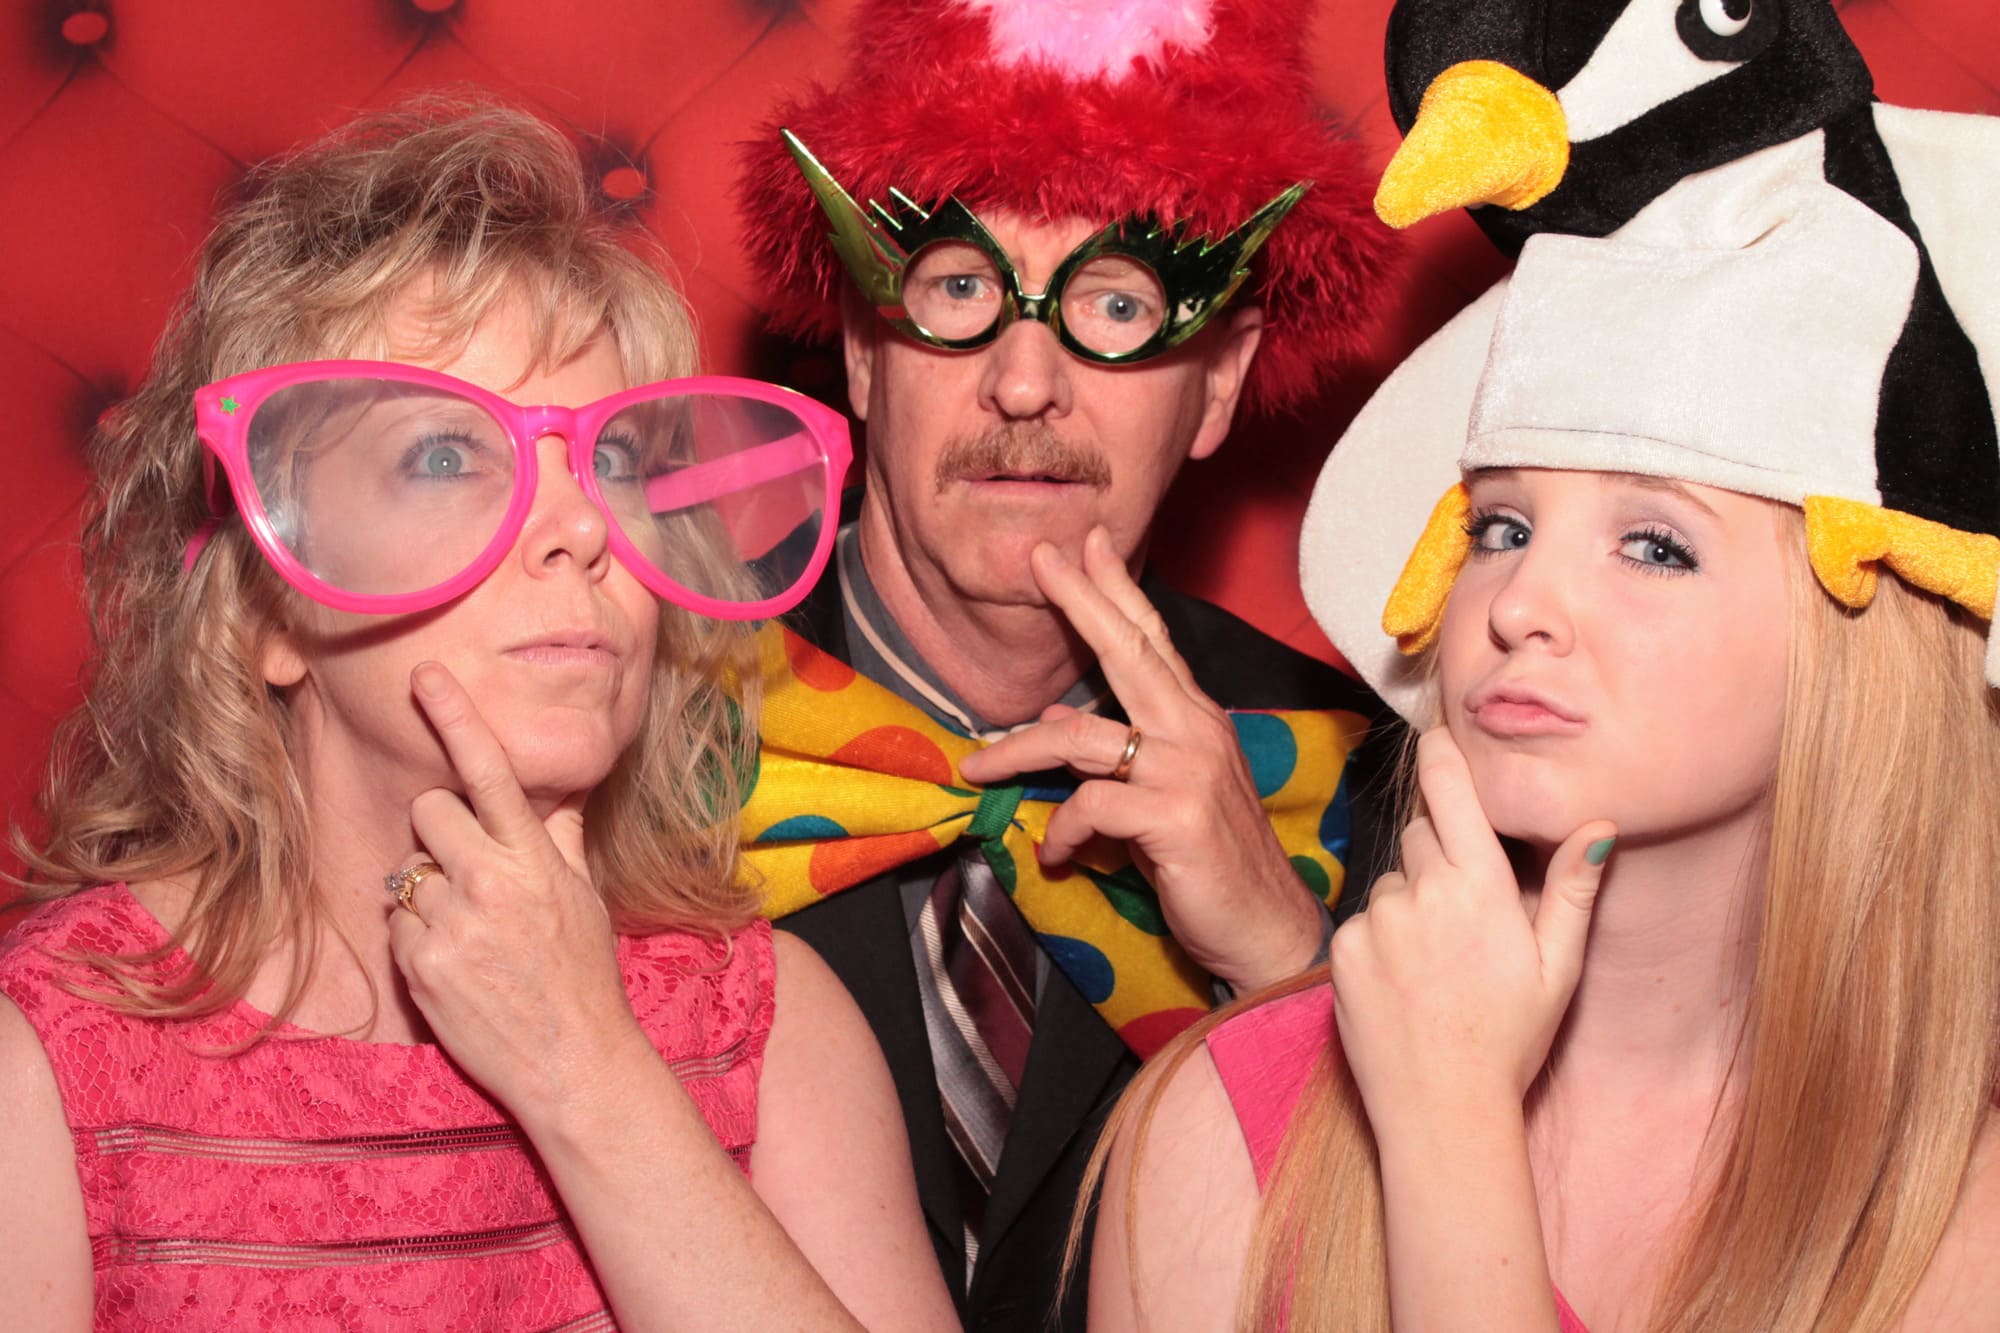 Photo Booth Rental-Austin-Wedding-Fun-No. 1-Colorful-Redl-Backdrop-Outstanding-Photography